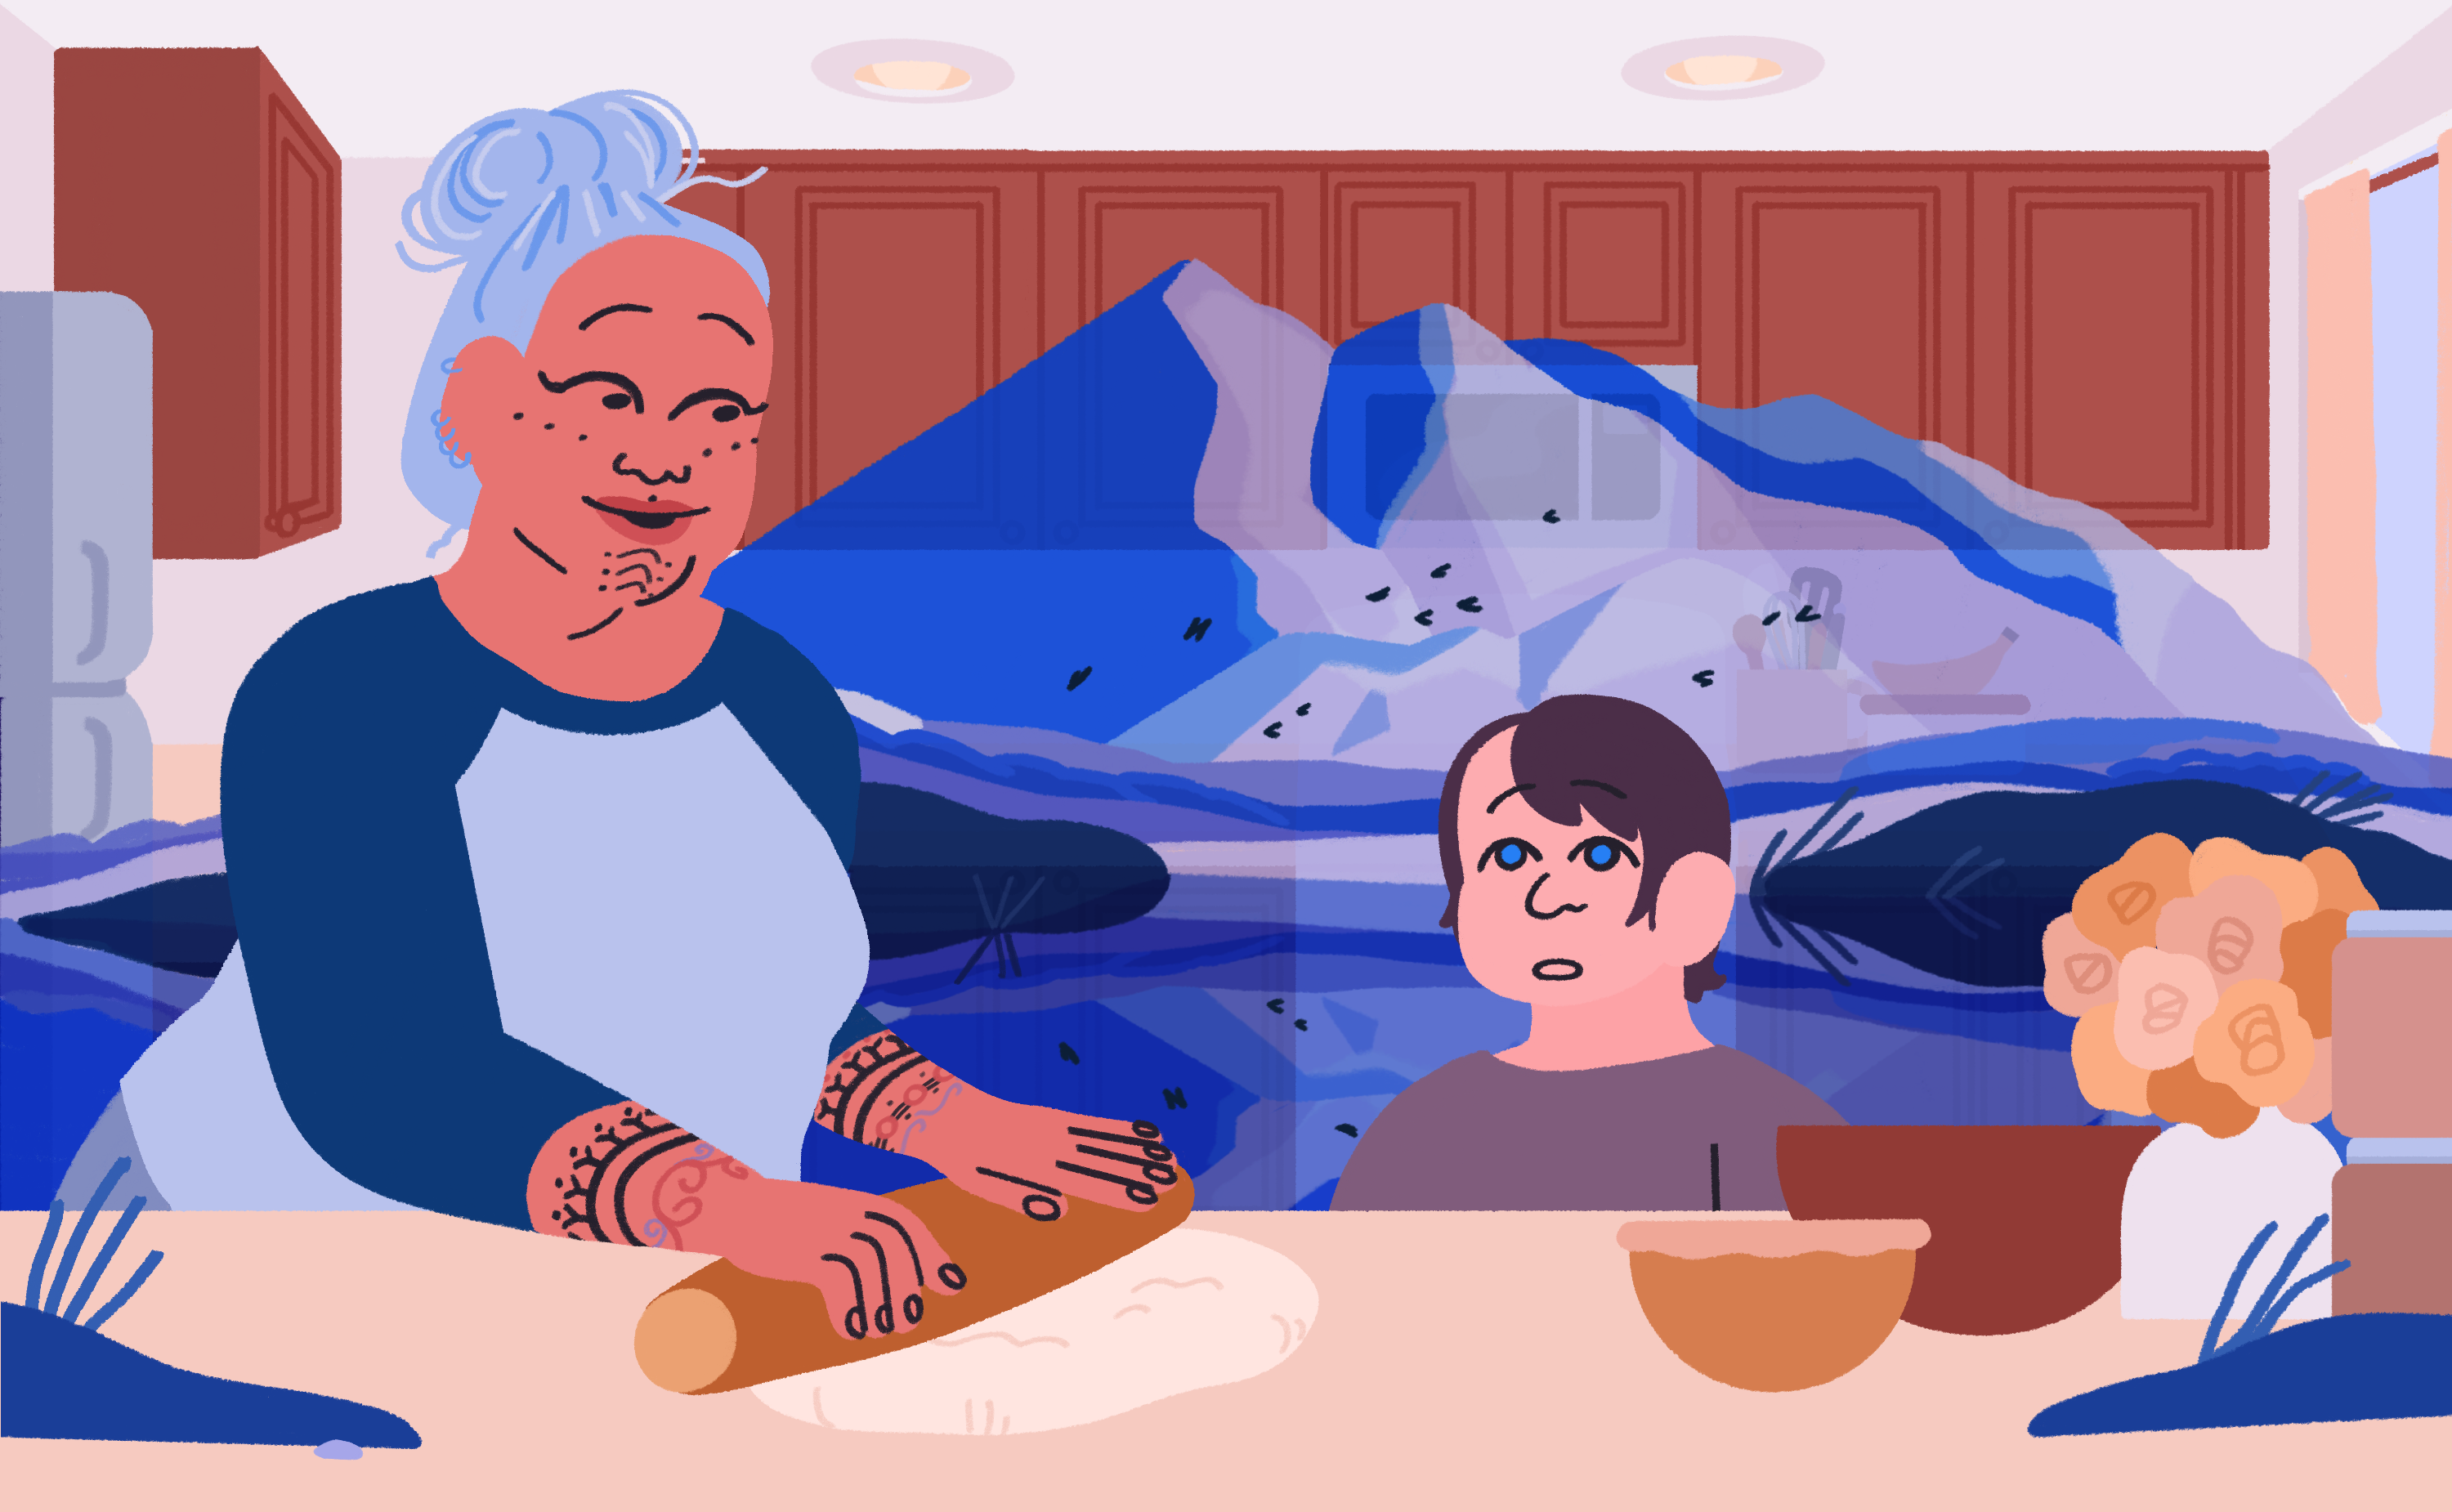 An illustration of an older woman making bread in a kitchen with a little boy. In the background as an overlay, there are blue mountains.